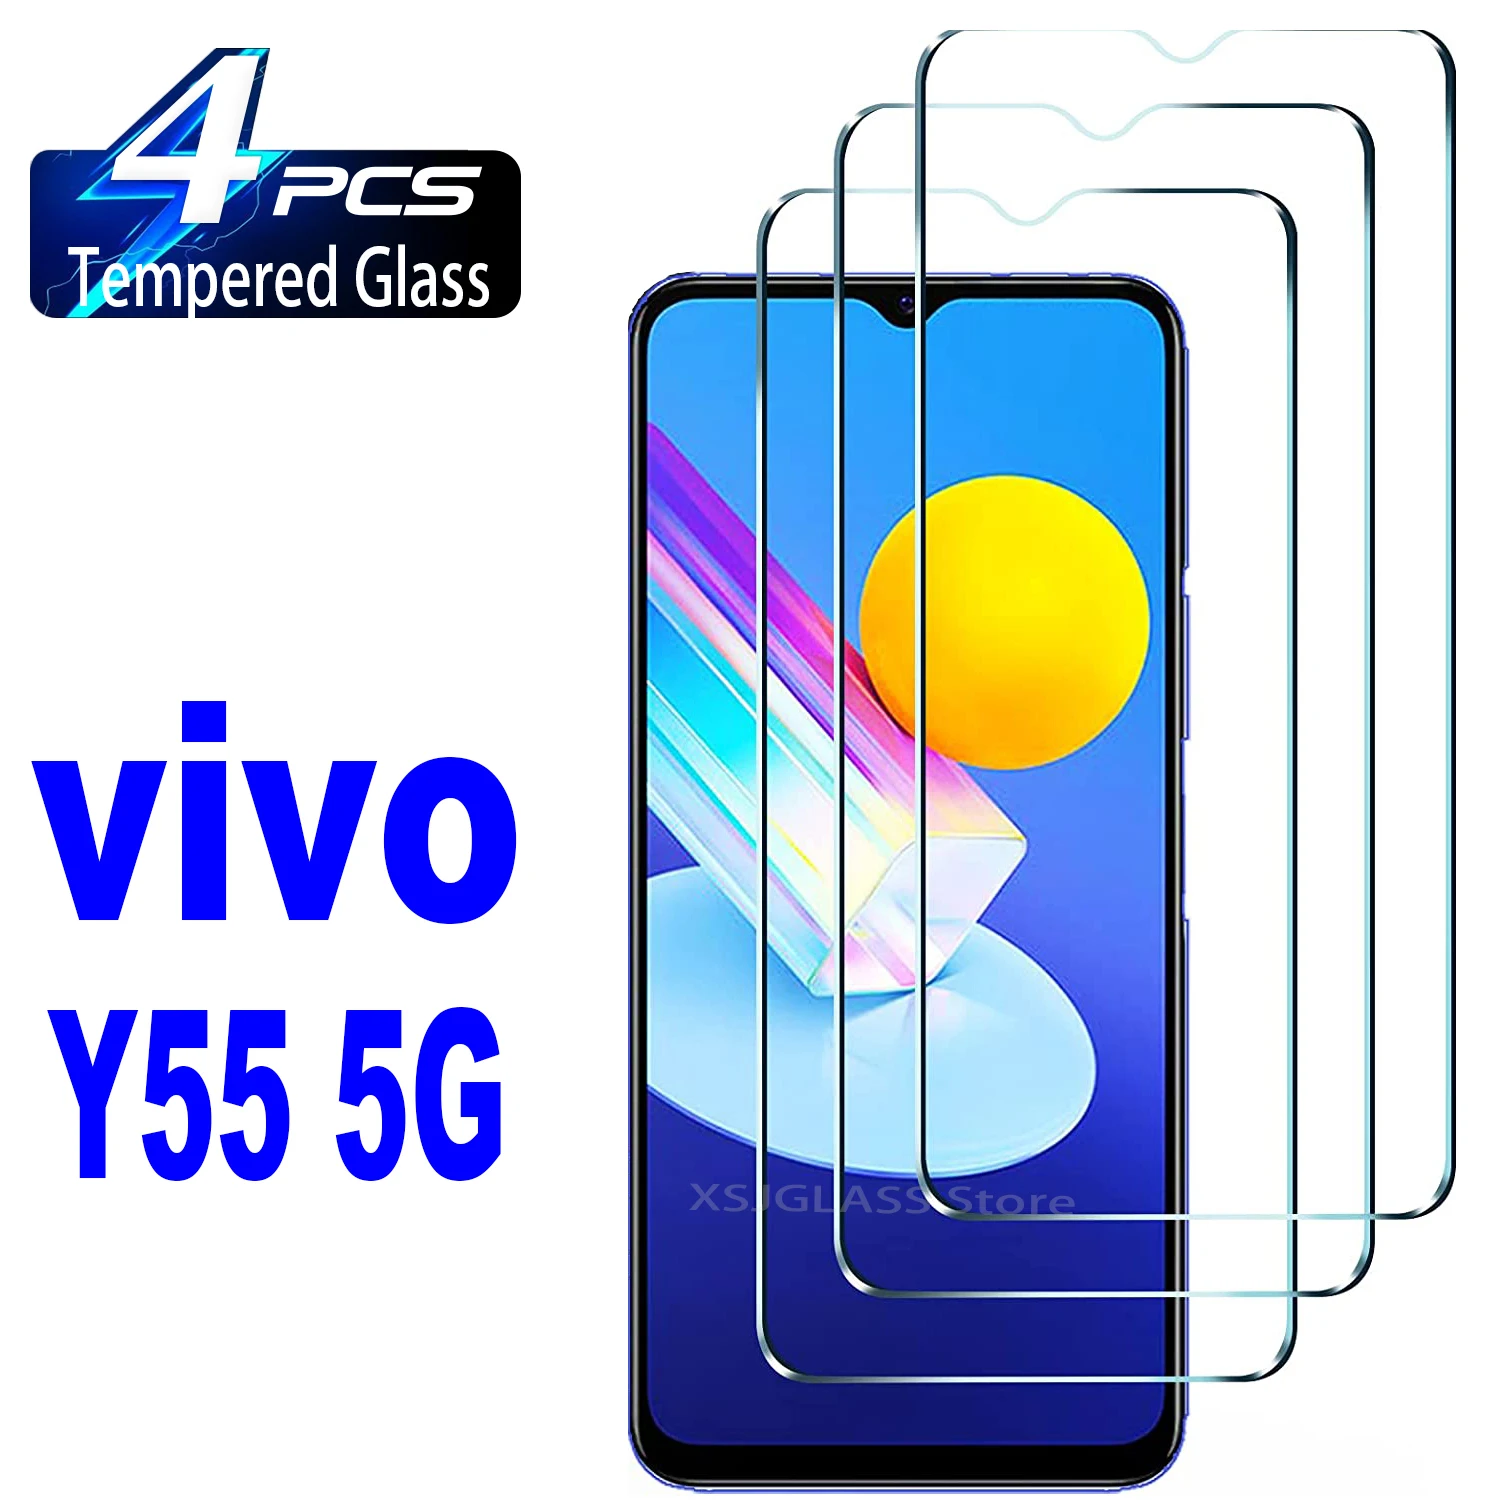 2-4pcs-tempered-glass-for-vivo-y55-5g-screen-protector-glass-film